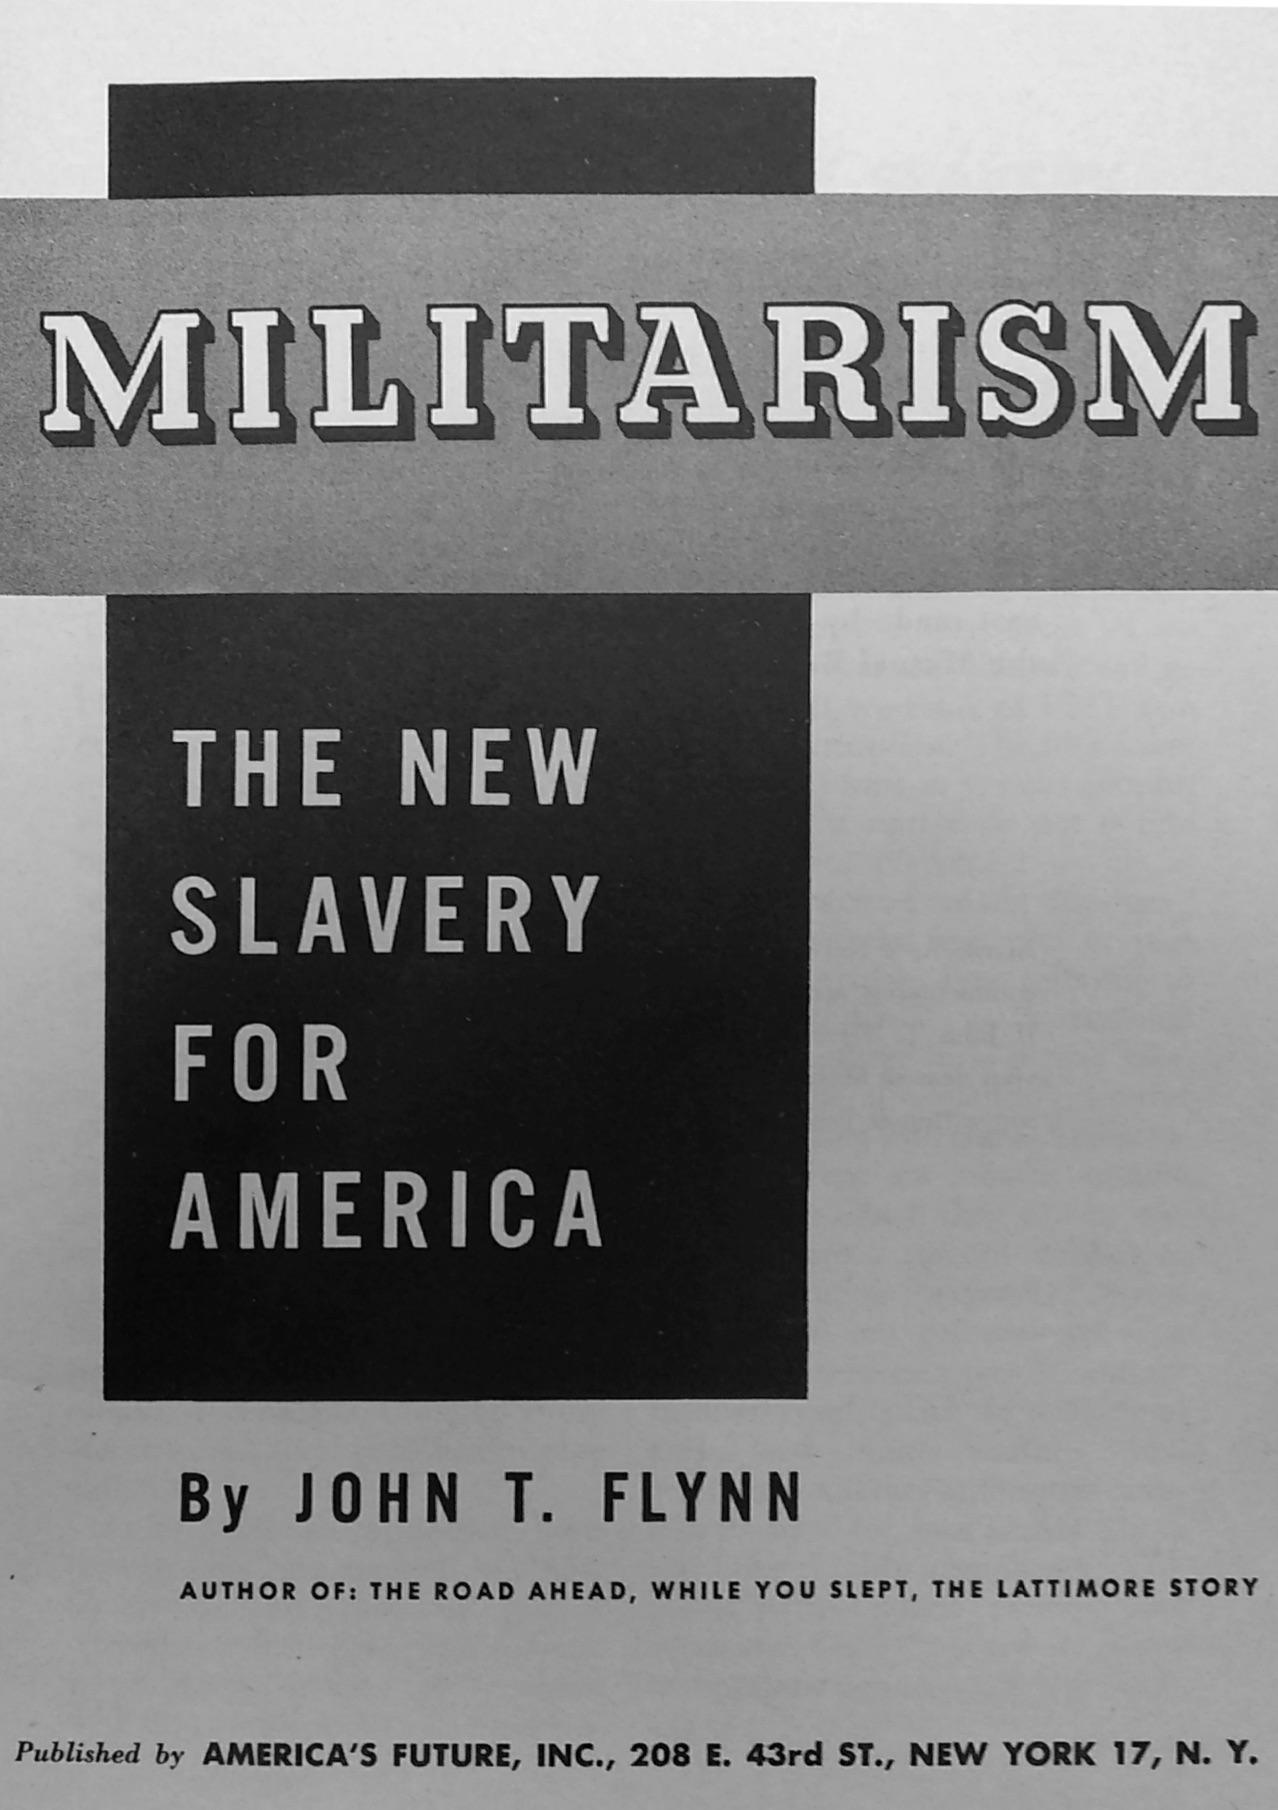 Militarism - The New Slavery for America (1955) by John T. Flynn